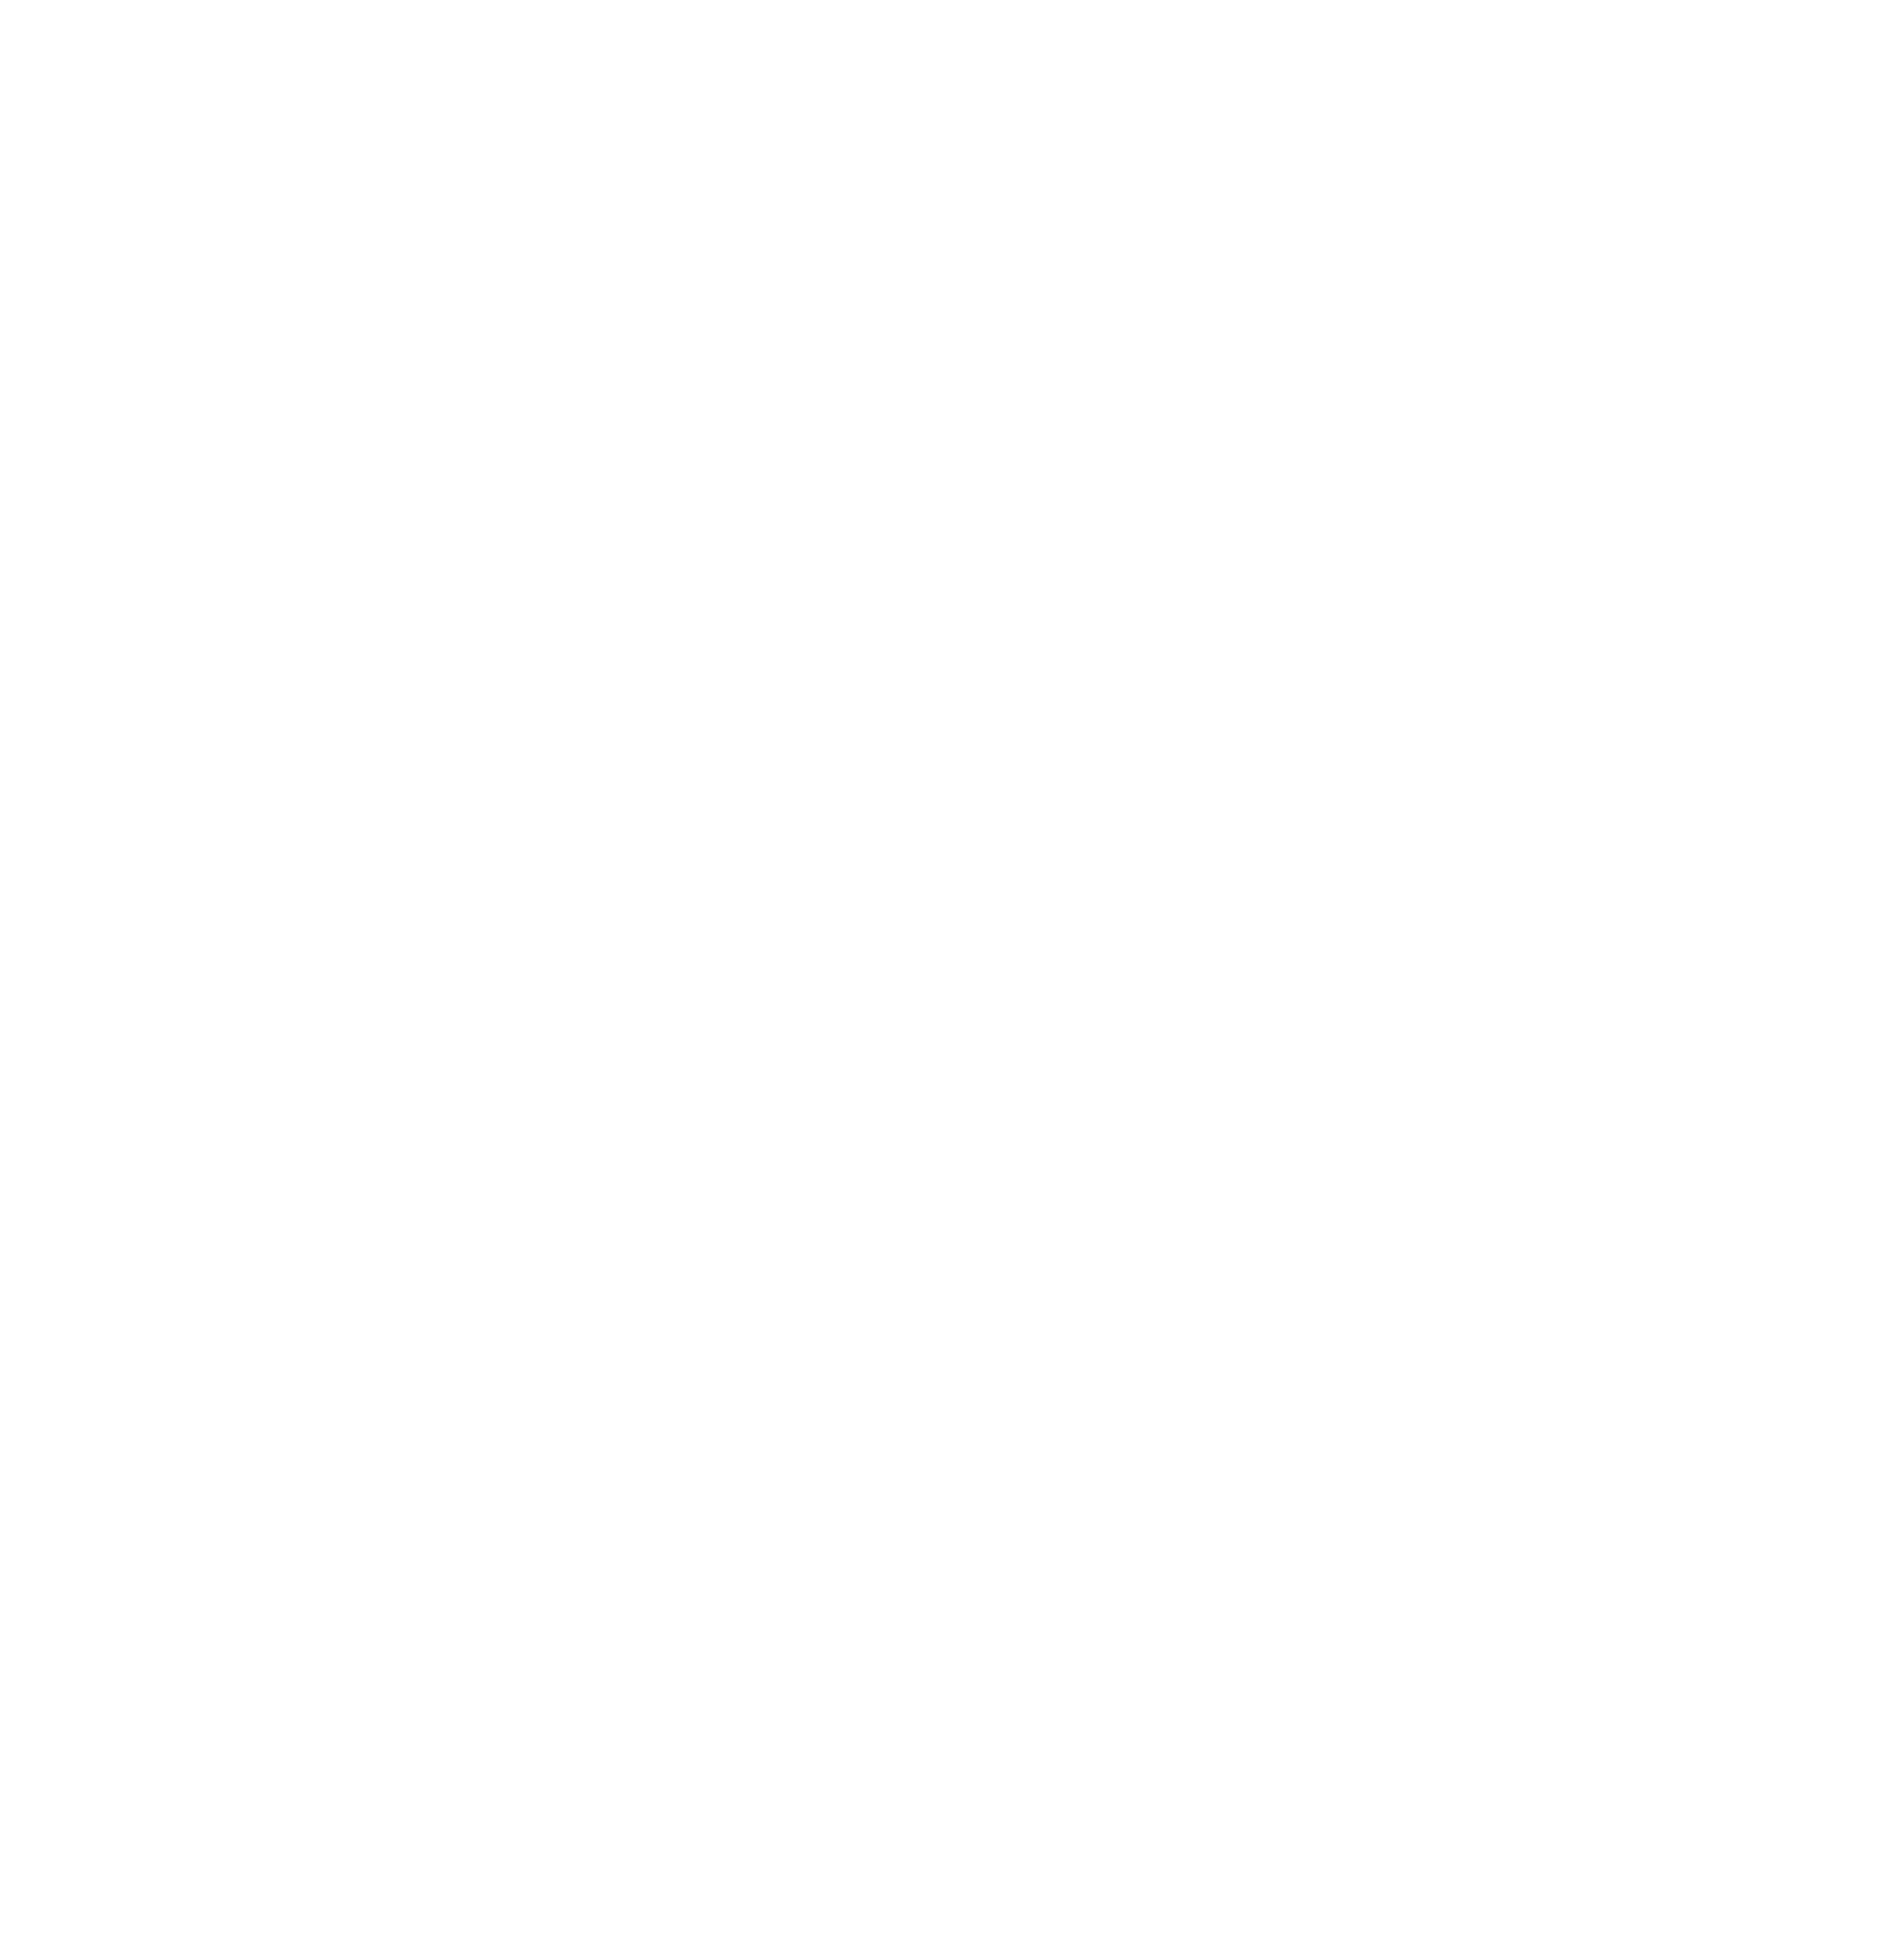 The logo of X (Formerly Twitter).